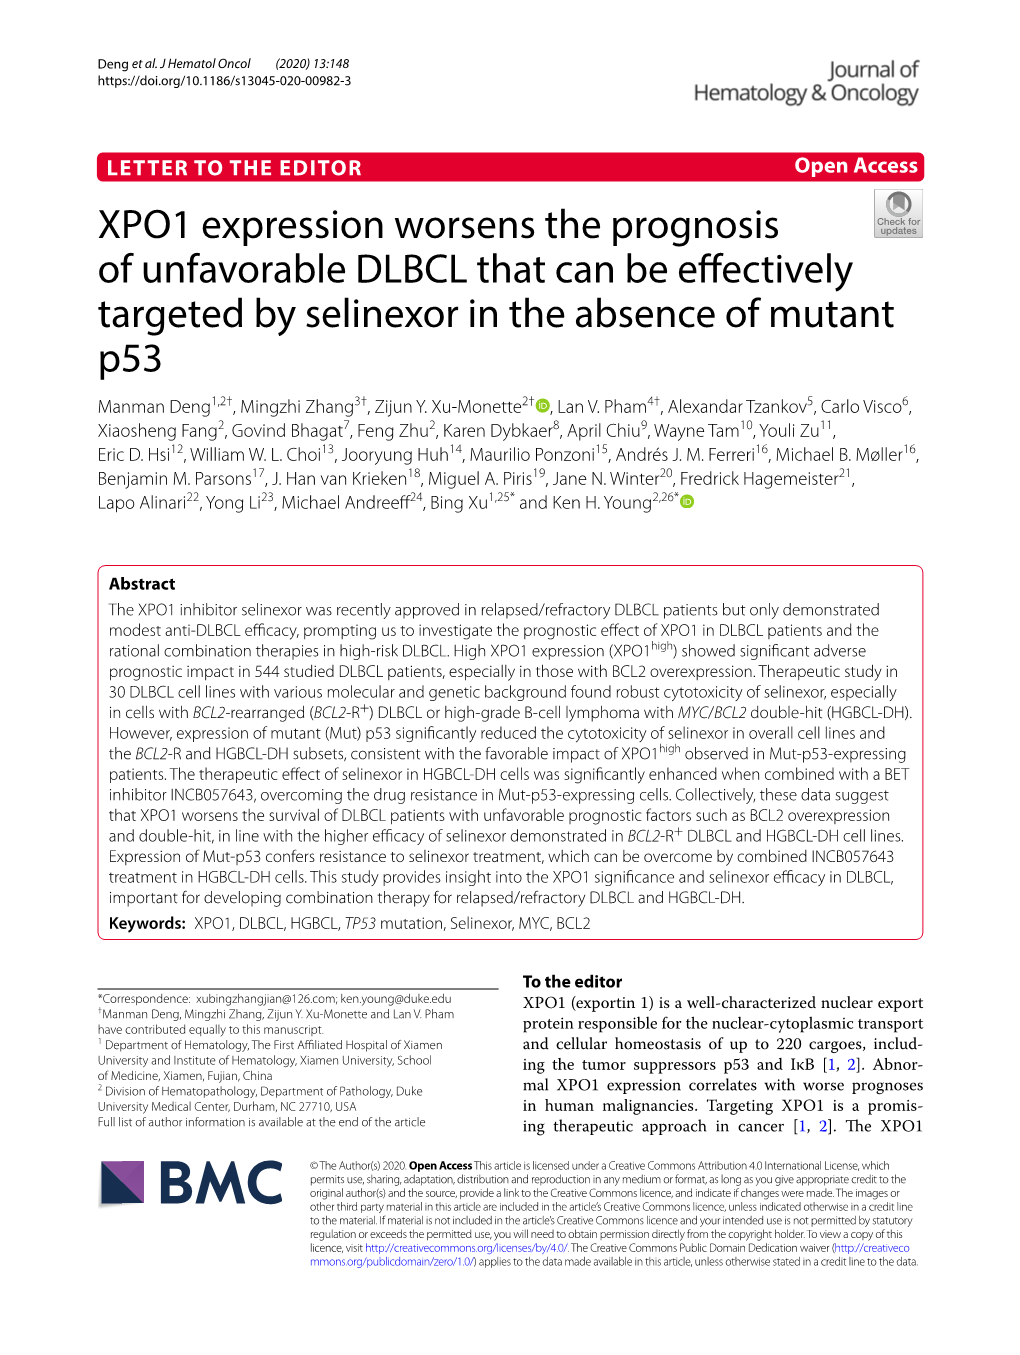 XPO1 Expression Worsens the Prognosis of Unfavorable DLBCL